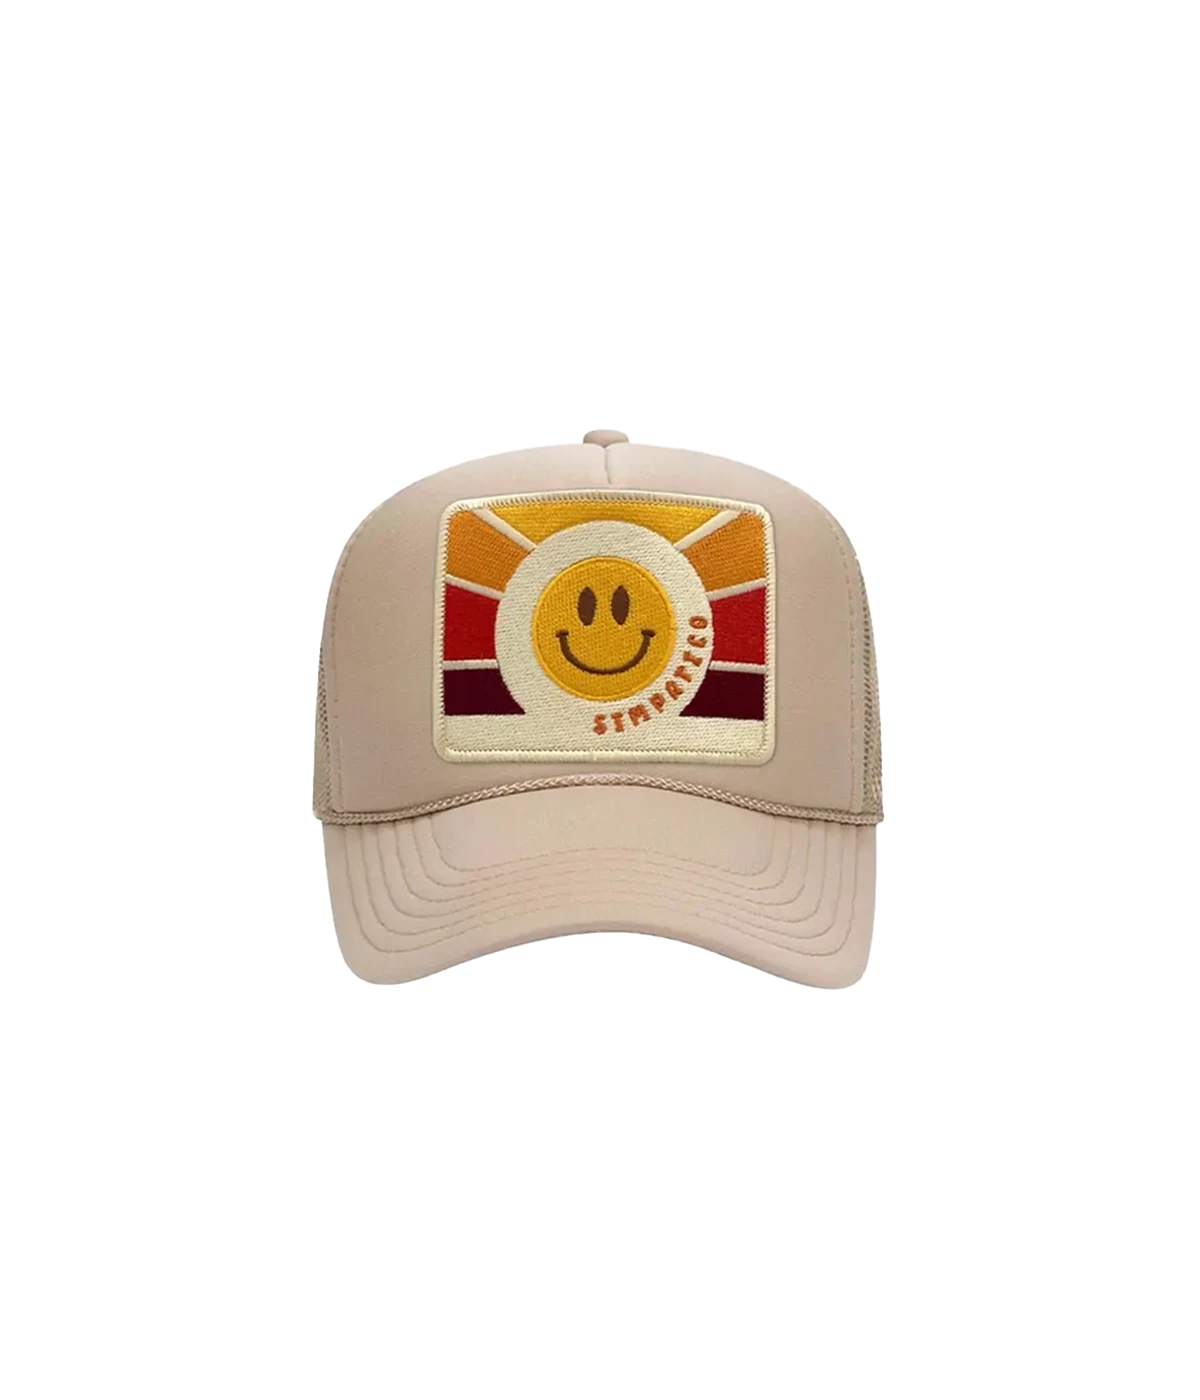 A statement trucker hat in a neutral beige colourway, featuring a red, orange and yellow sunrise style smile face and sympatico written  text, curved brim hat and netted back. Statement hat, throw on and go, easy to wear, summer staple, made internationally. 